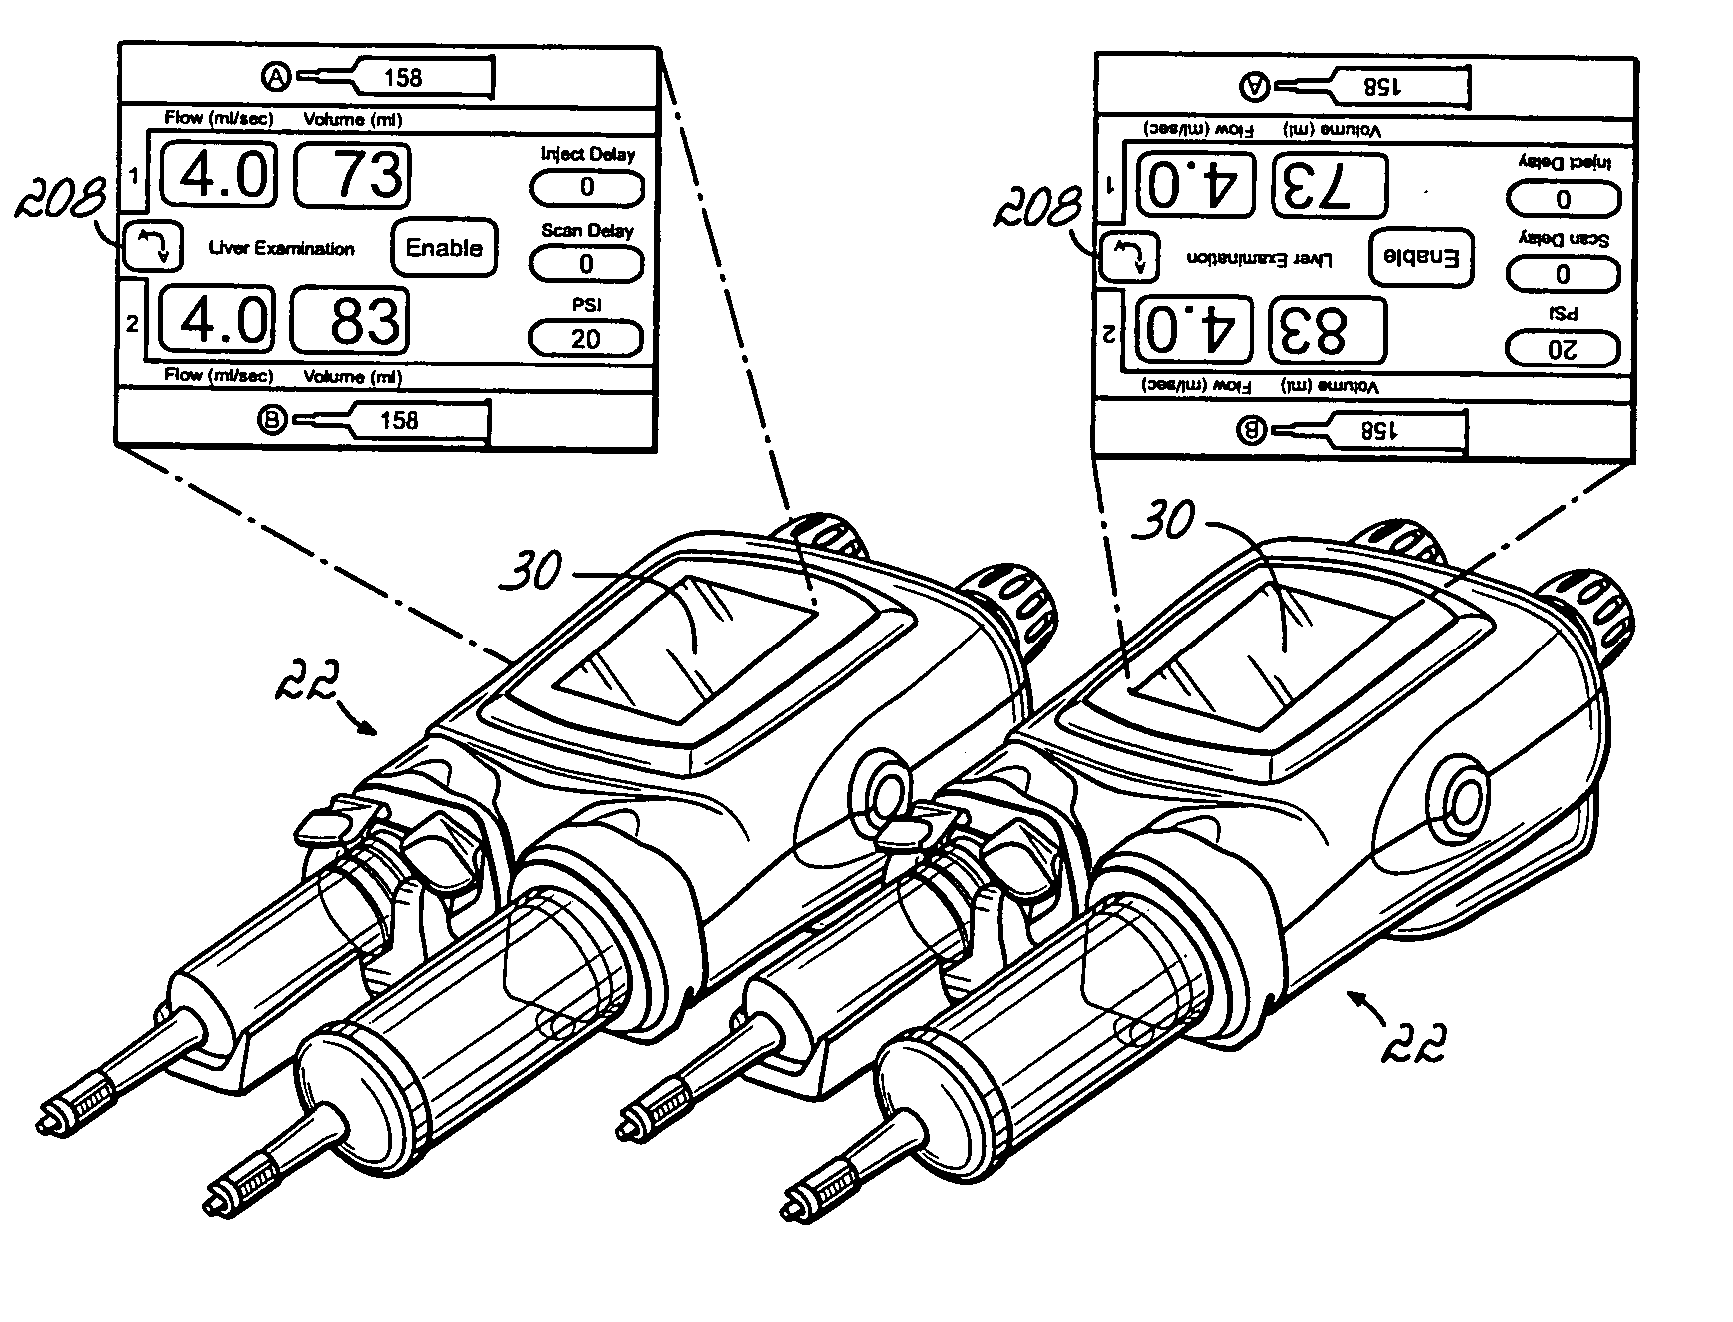 Powerhead control in a power injection system